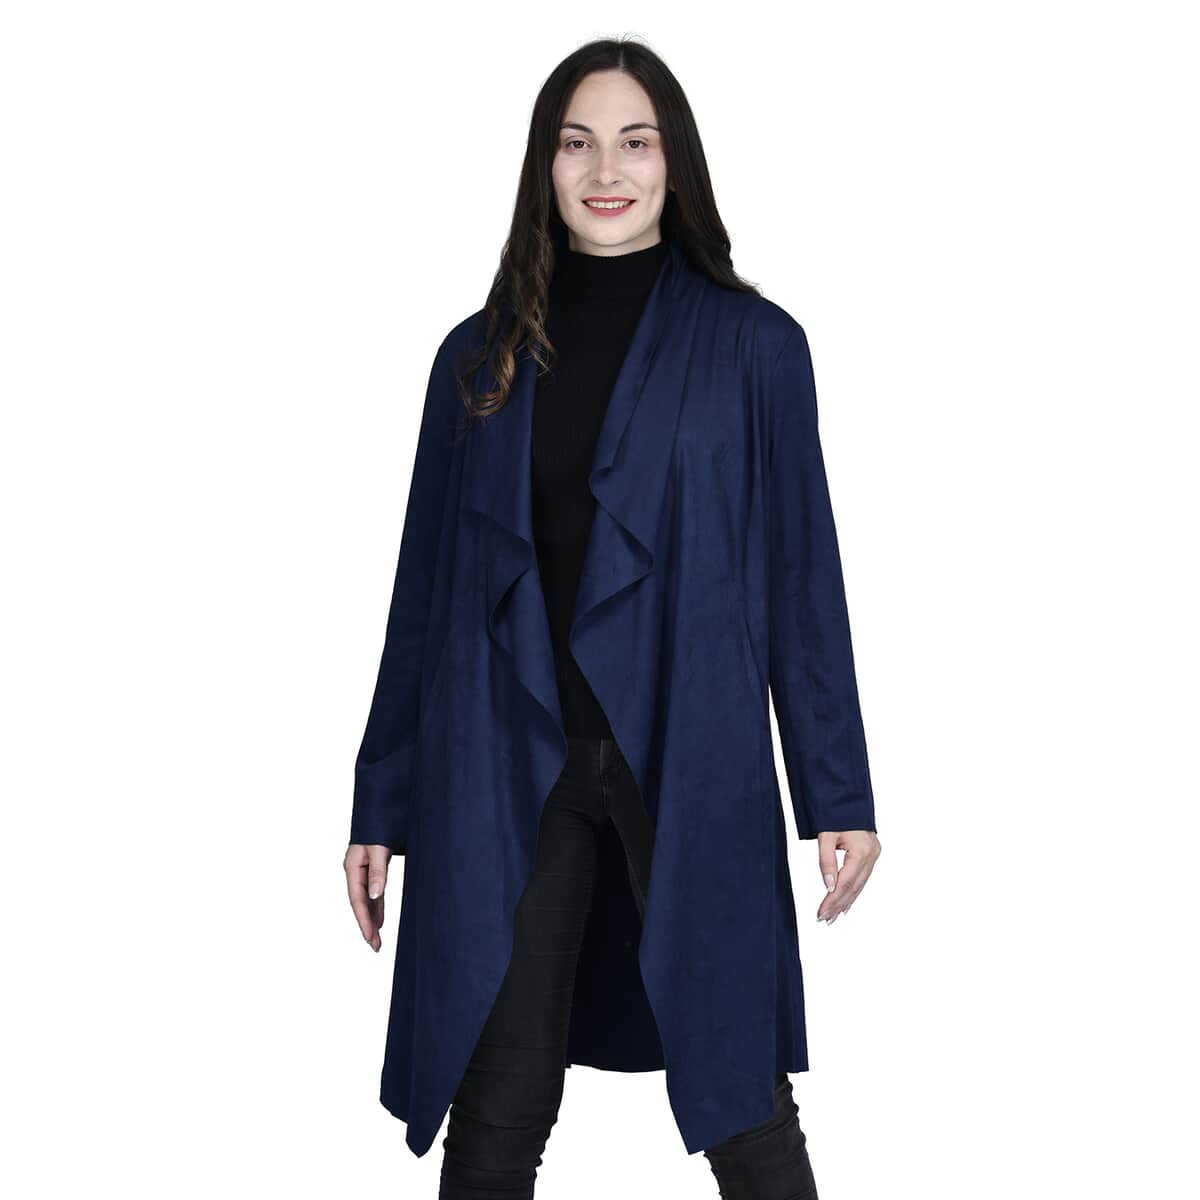 Passage Navy Faux Suede Long Waterfall Open Front Jacket For Ladies - XXL , Jacket for Women , Long Coat Jacket for Women , Womens Coats image number 3